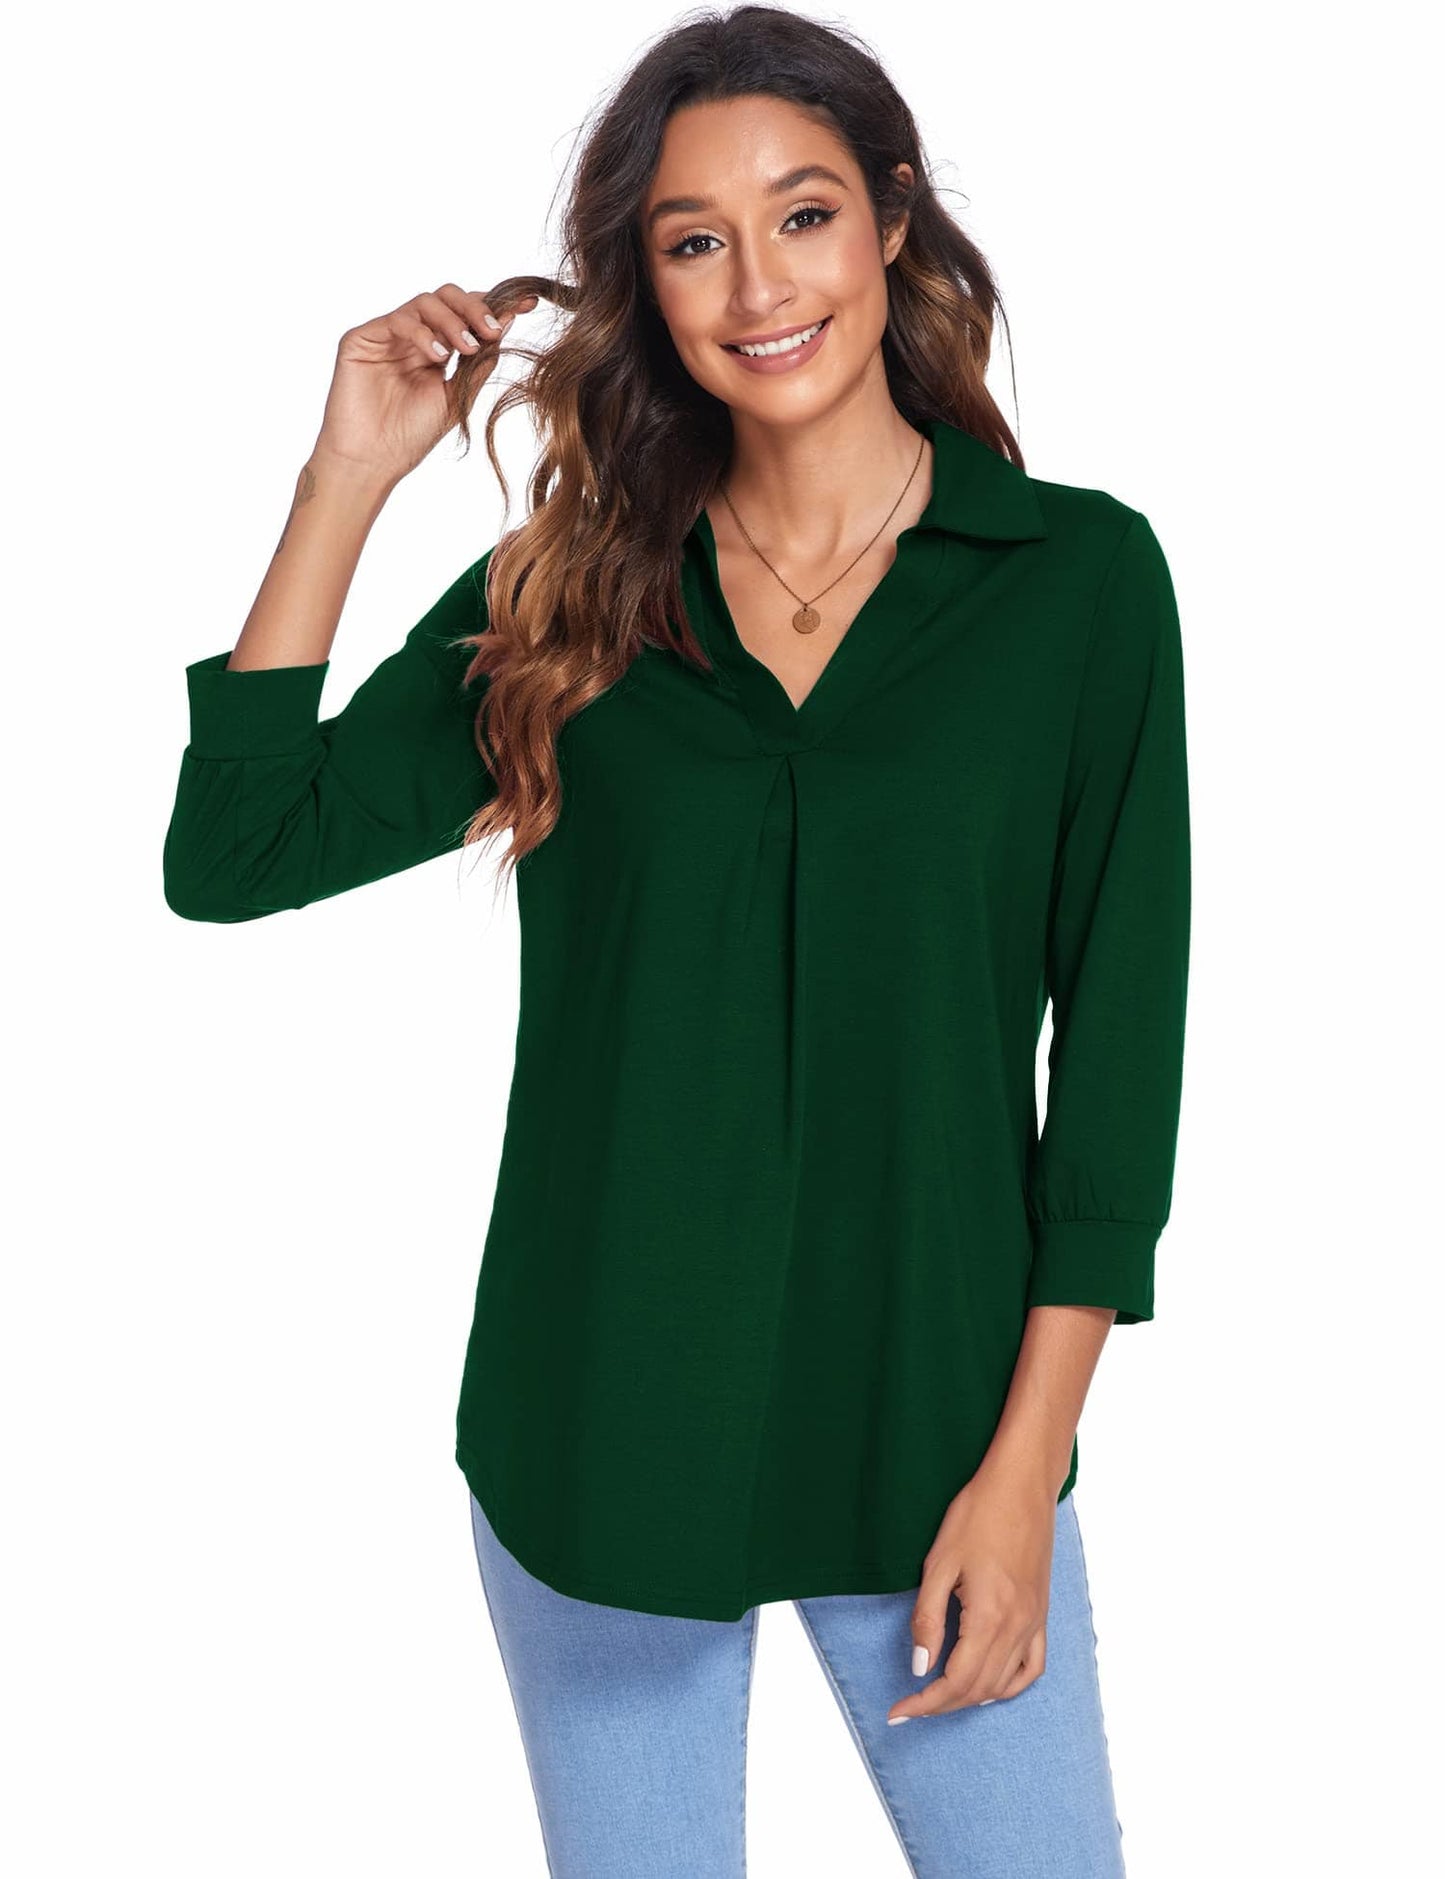 MsDressly Blouses Collared V Neck Casual Loose Blouse